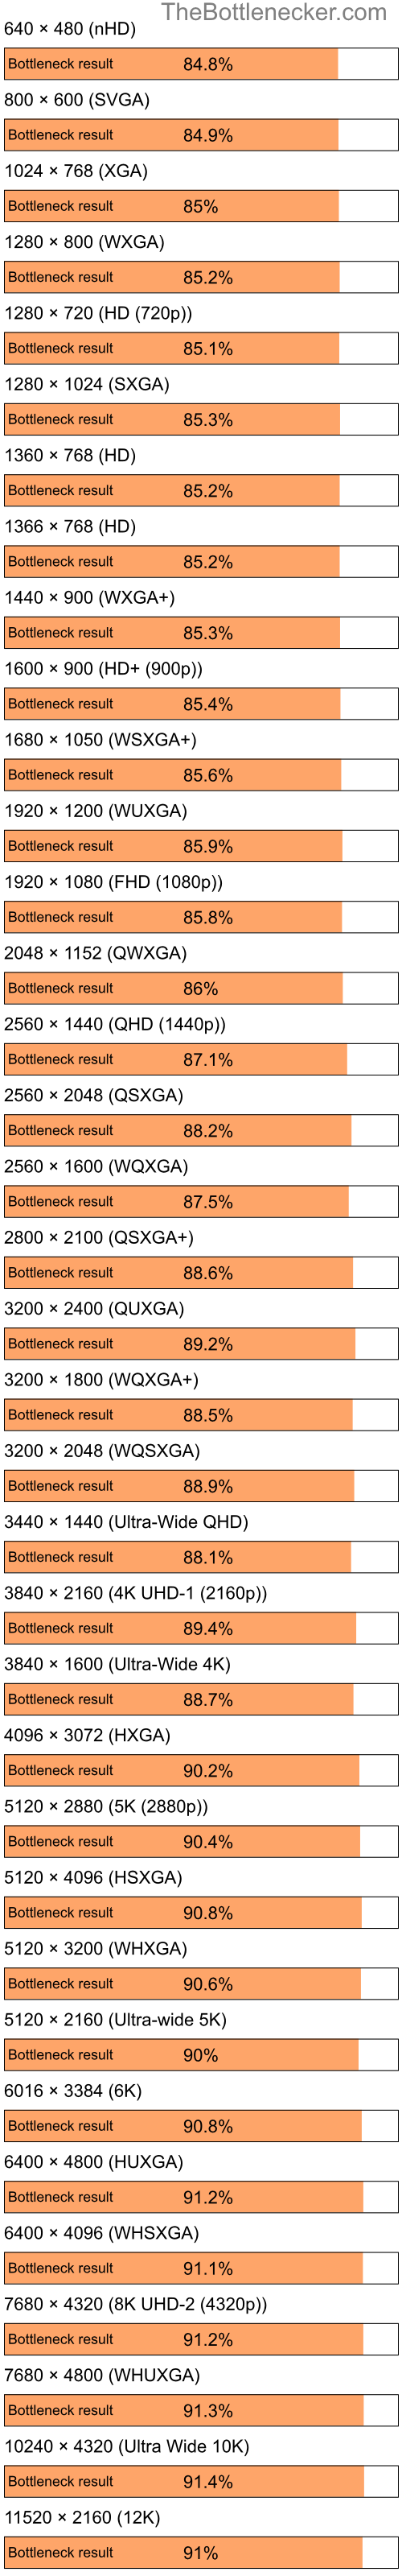 Bottleneck results by resolution for Intel Pentium 4 and AMD Mobility Radeon 9000 IGP in Processor Intense Tasks